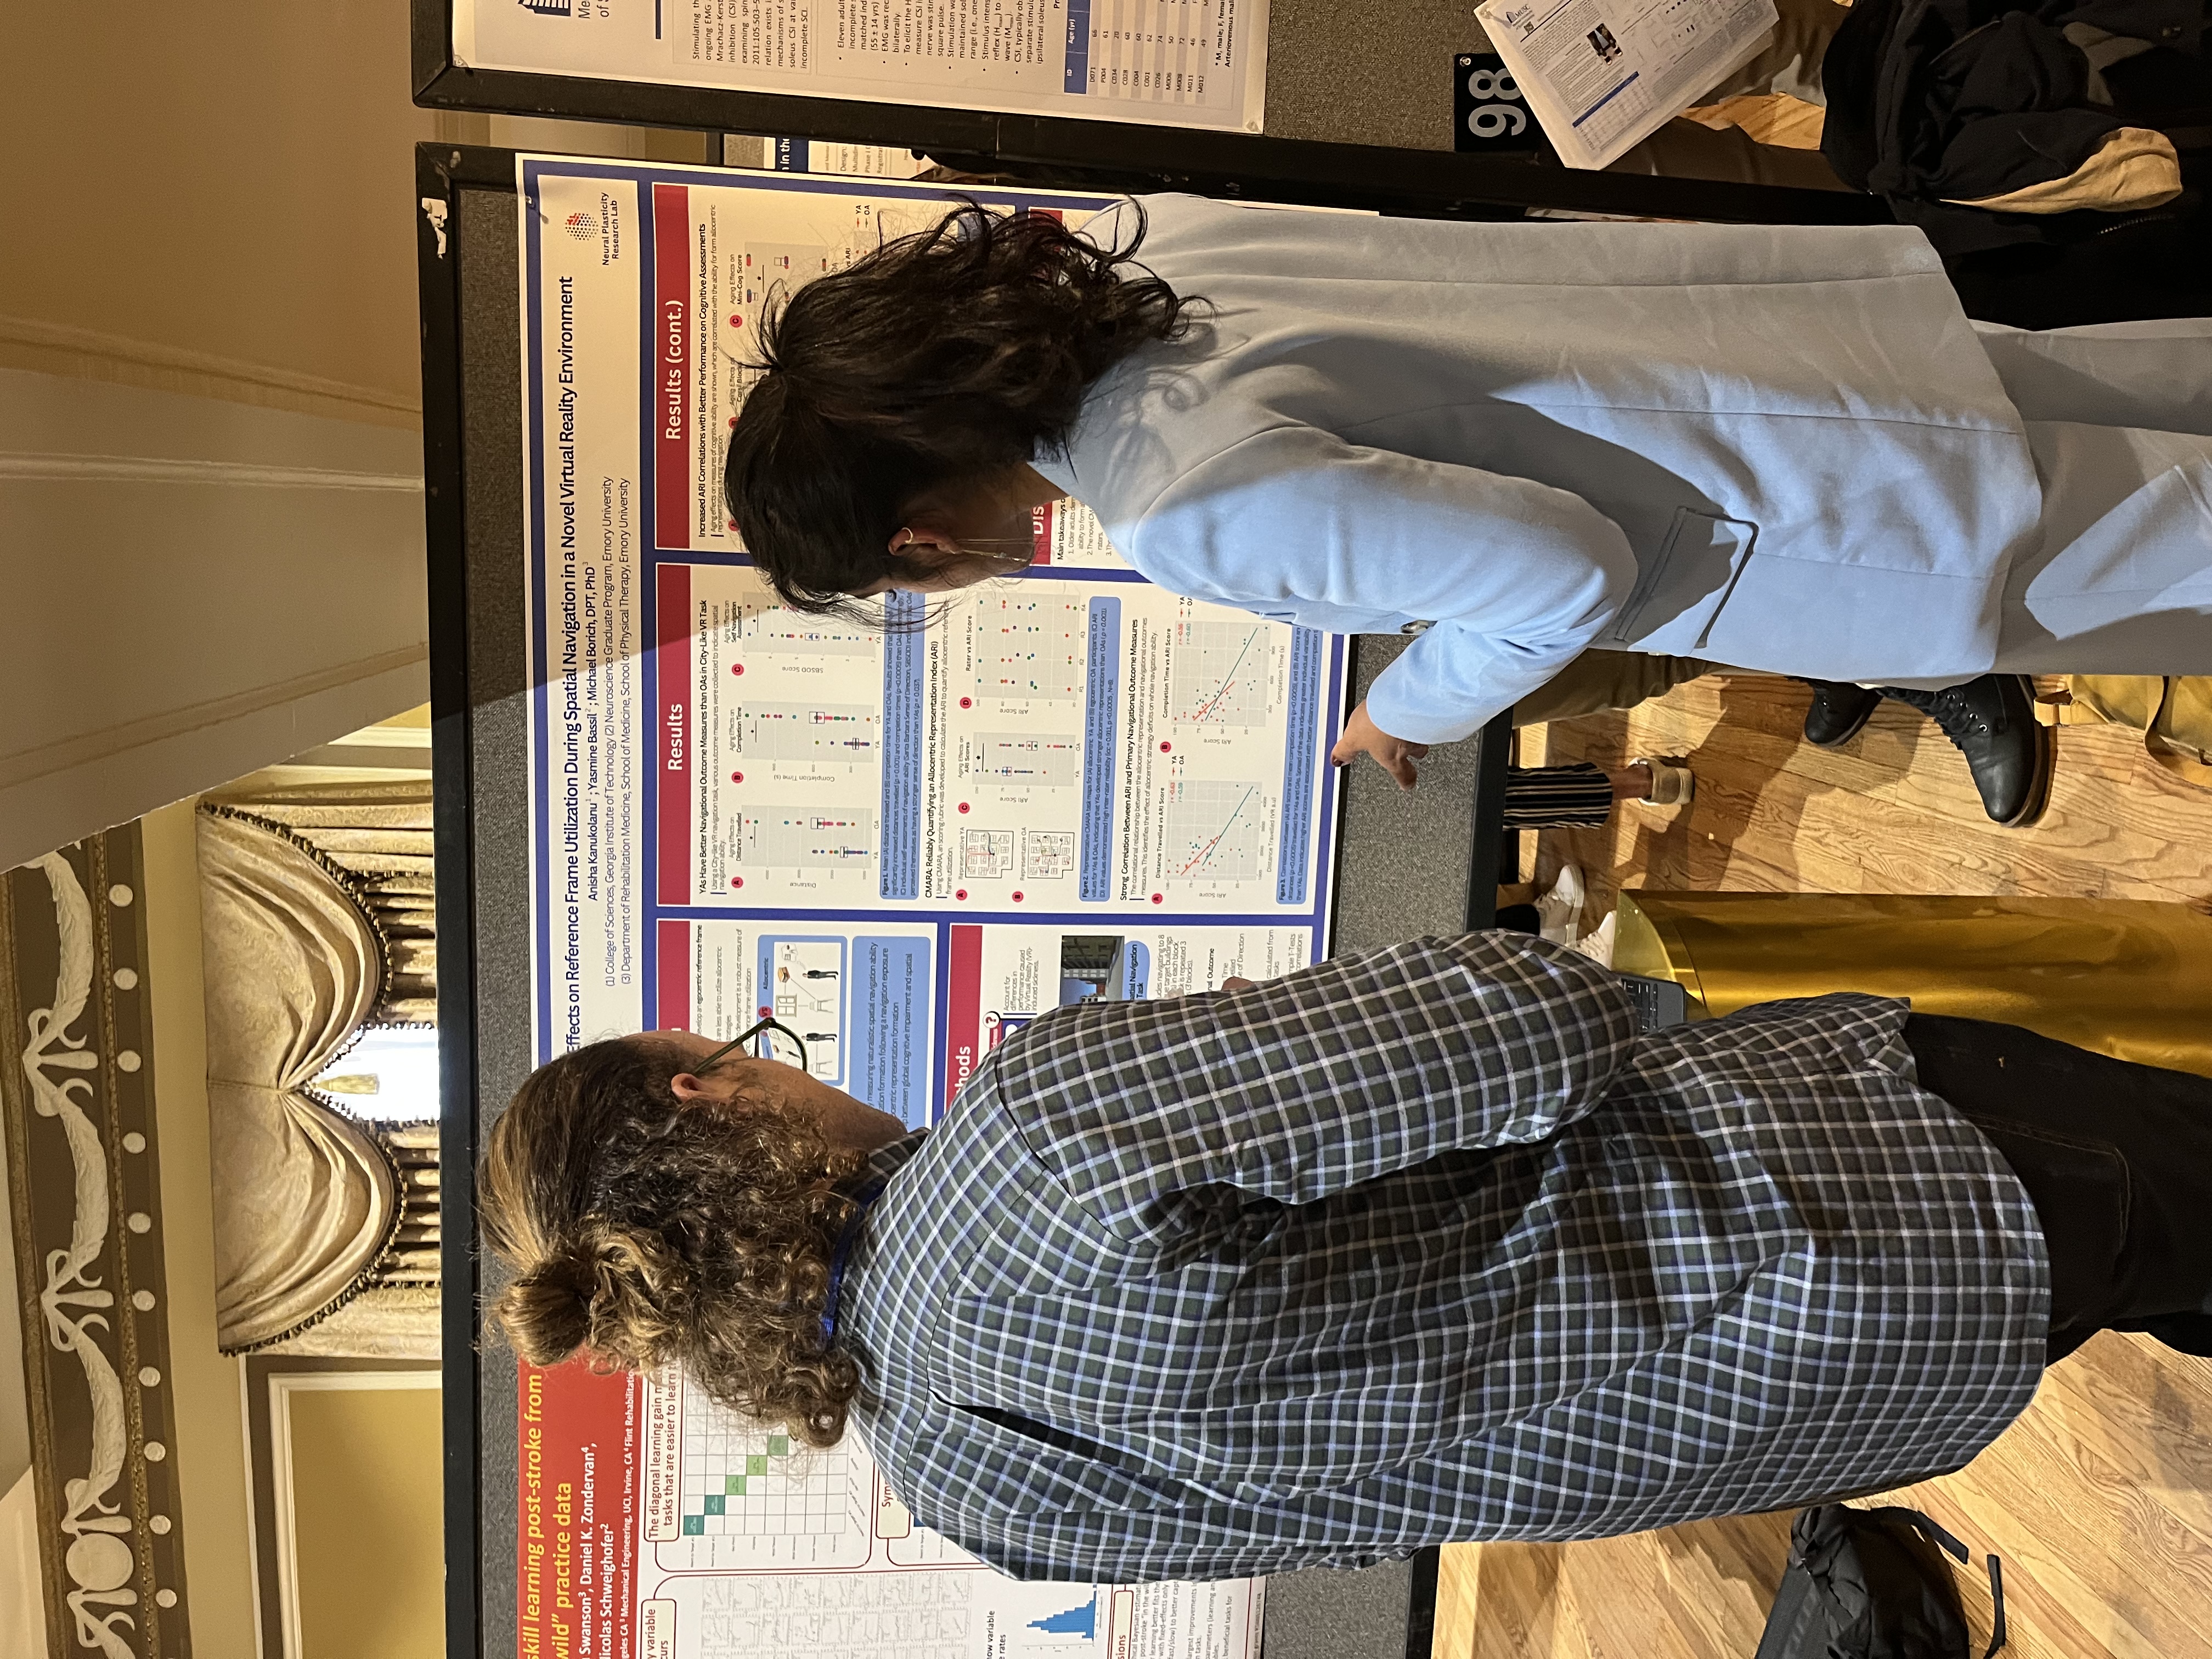 Anisha discussing her work with a colleague during a poster session.